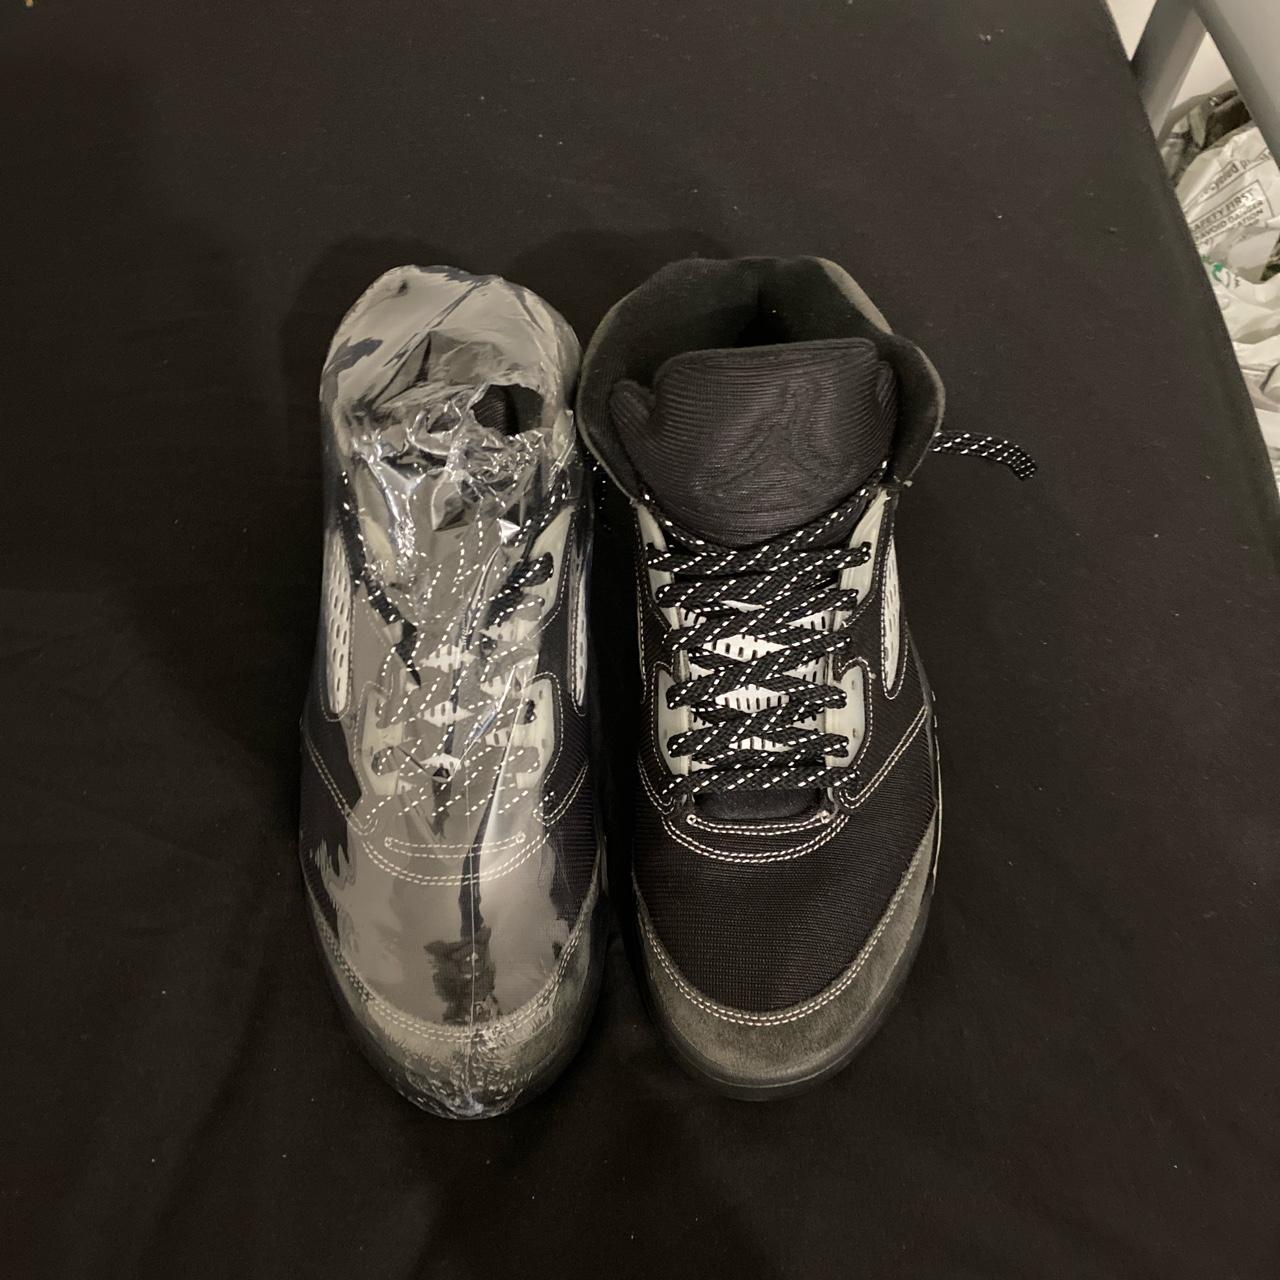 Jordan 5 anthracites - worn only once, replaced... - Depop